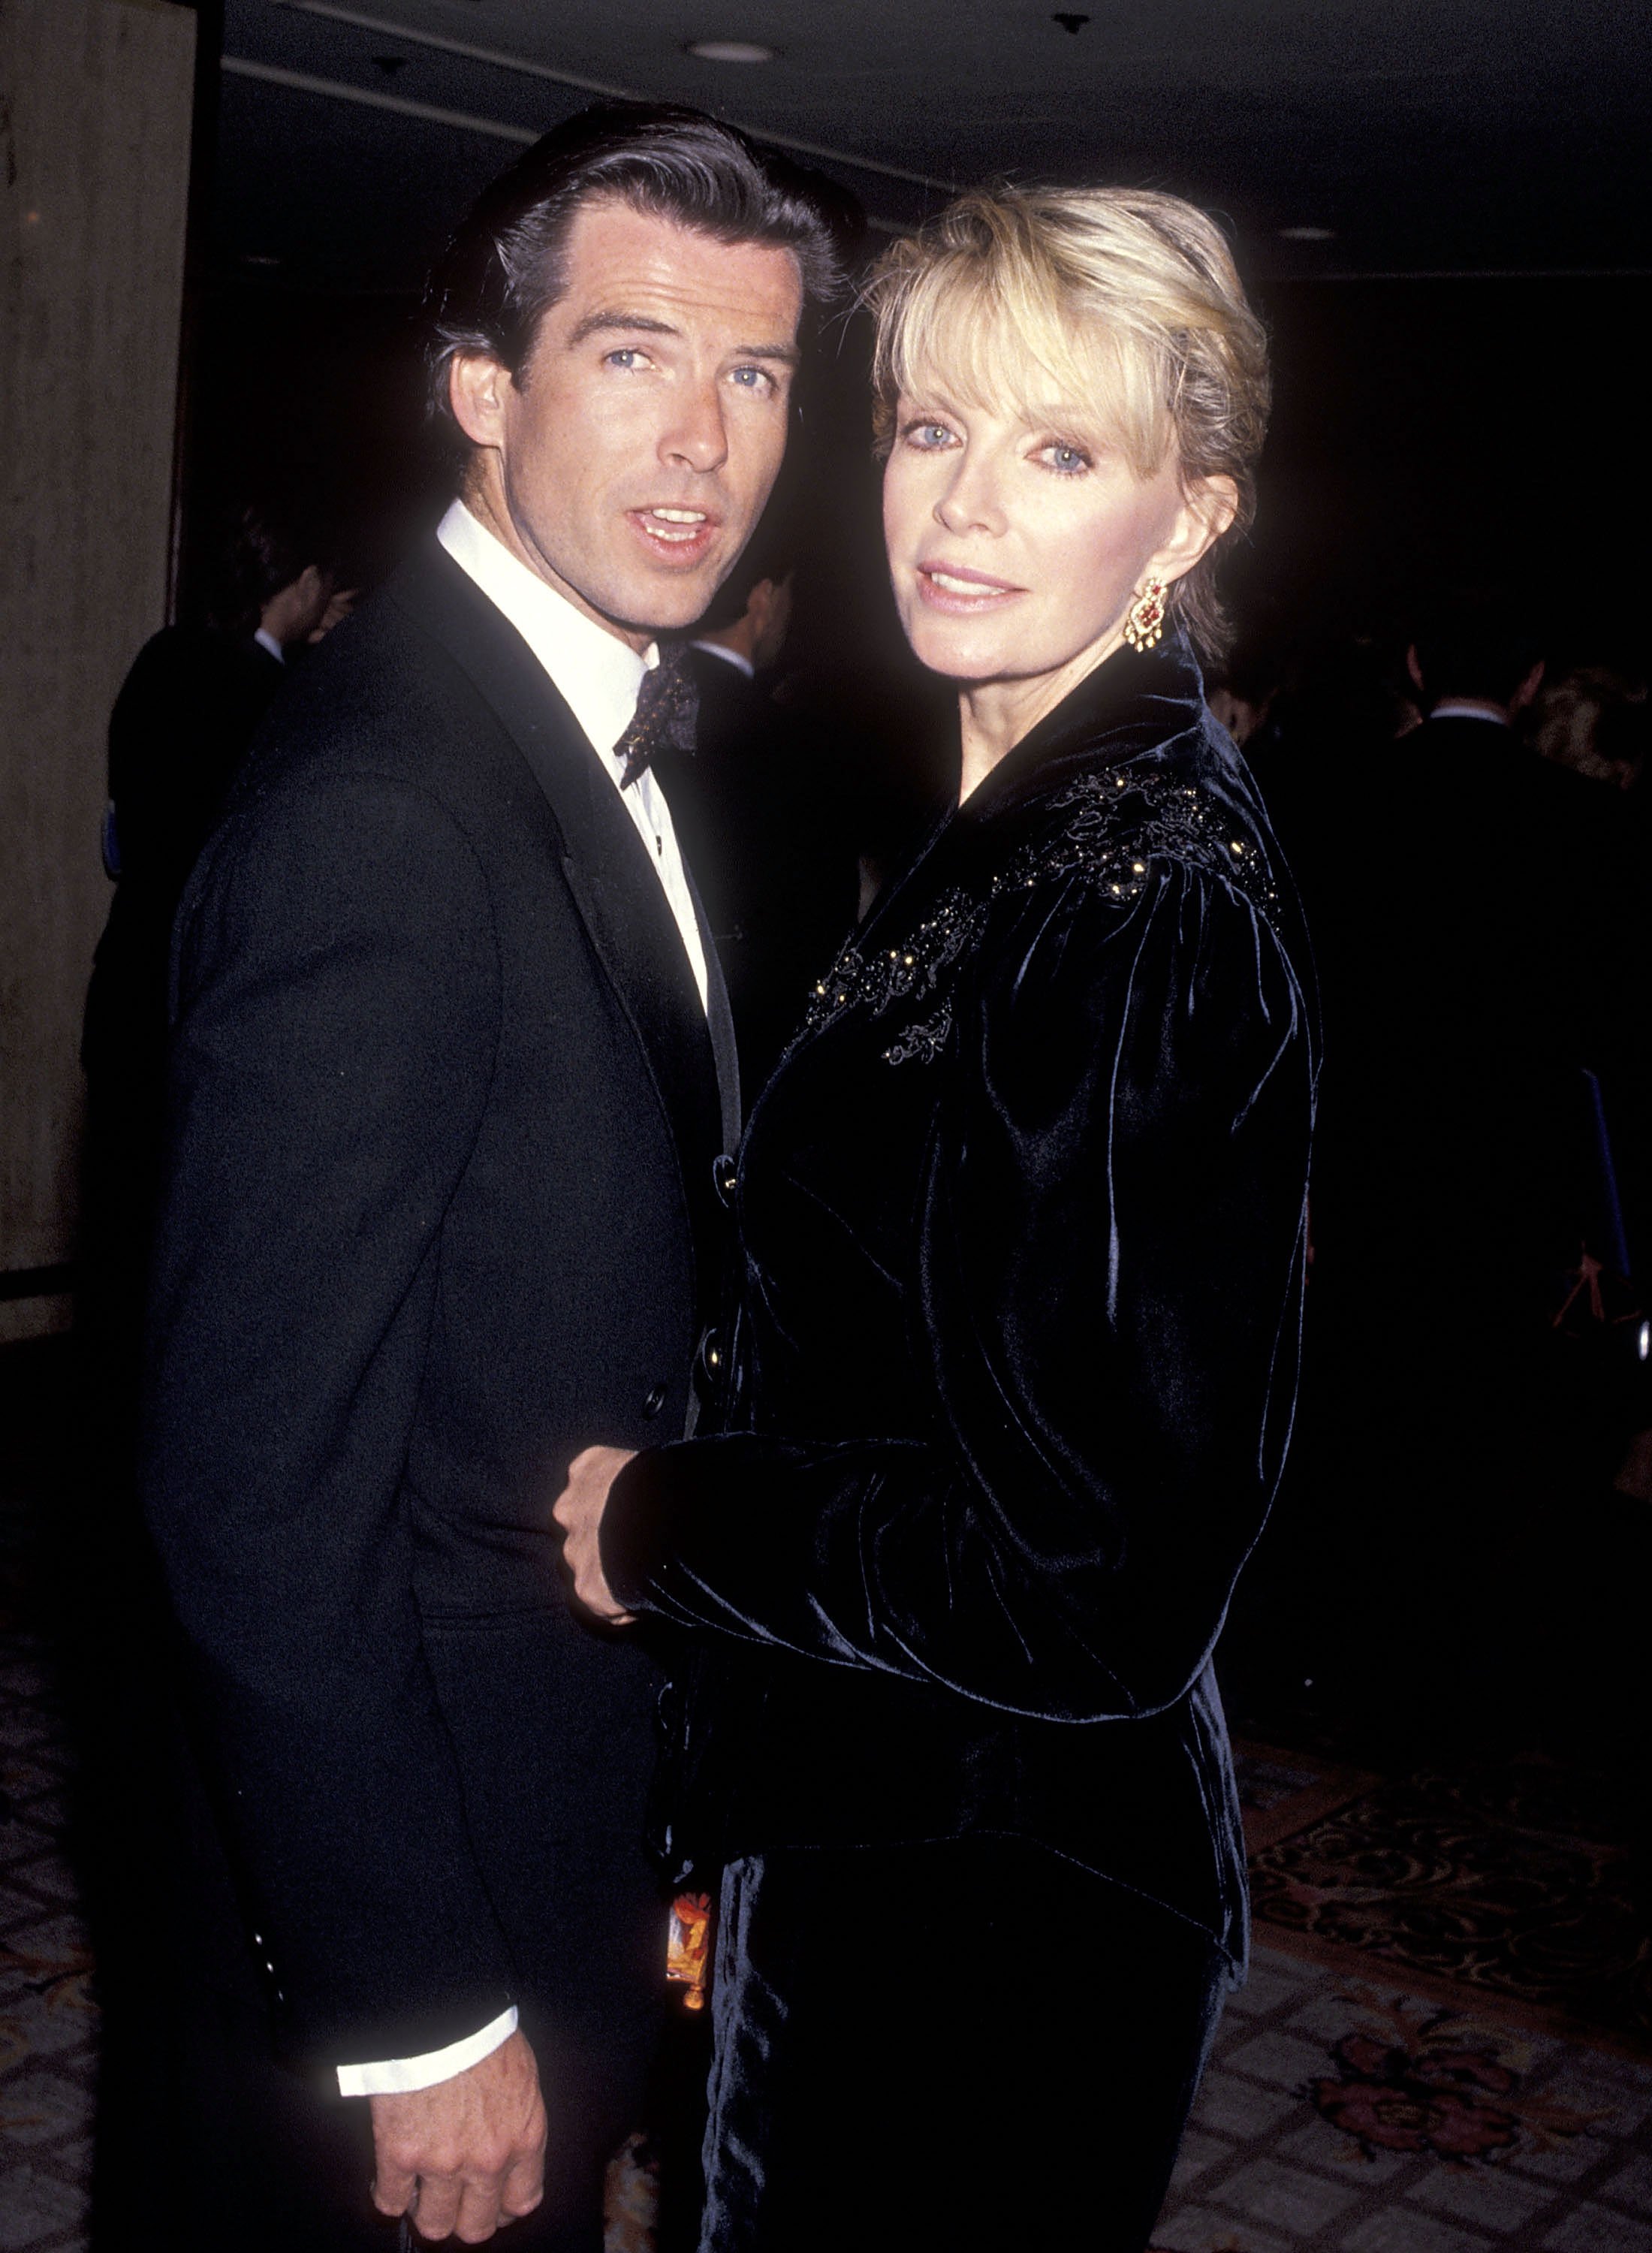 Actor Pierce Brosnan and wife Cassandra Harris at the California Fashion Industry Friends of AIDS Project Los Angeles on February 13, 1991 at the Century Plaza Hotel in Century City, California. | Source: Getty Images